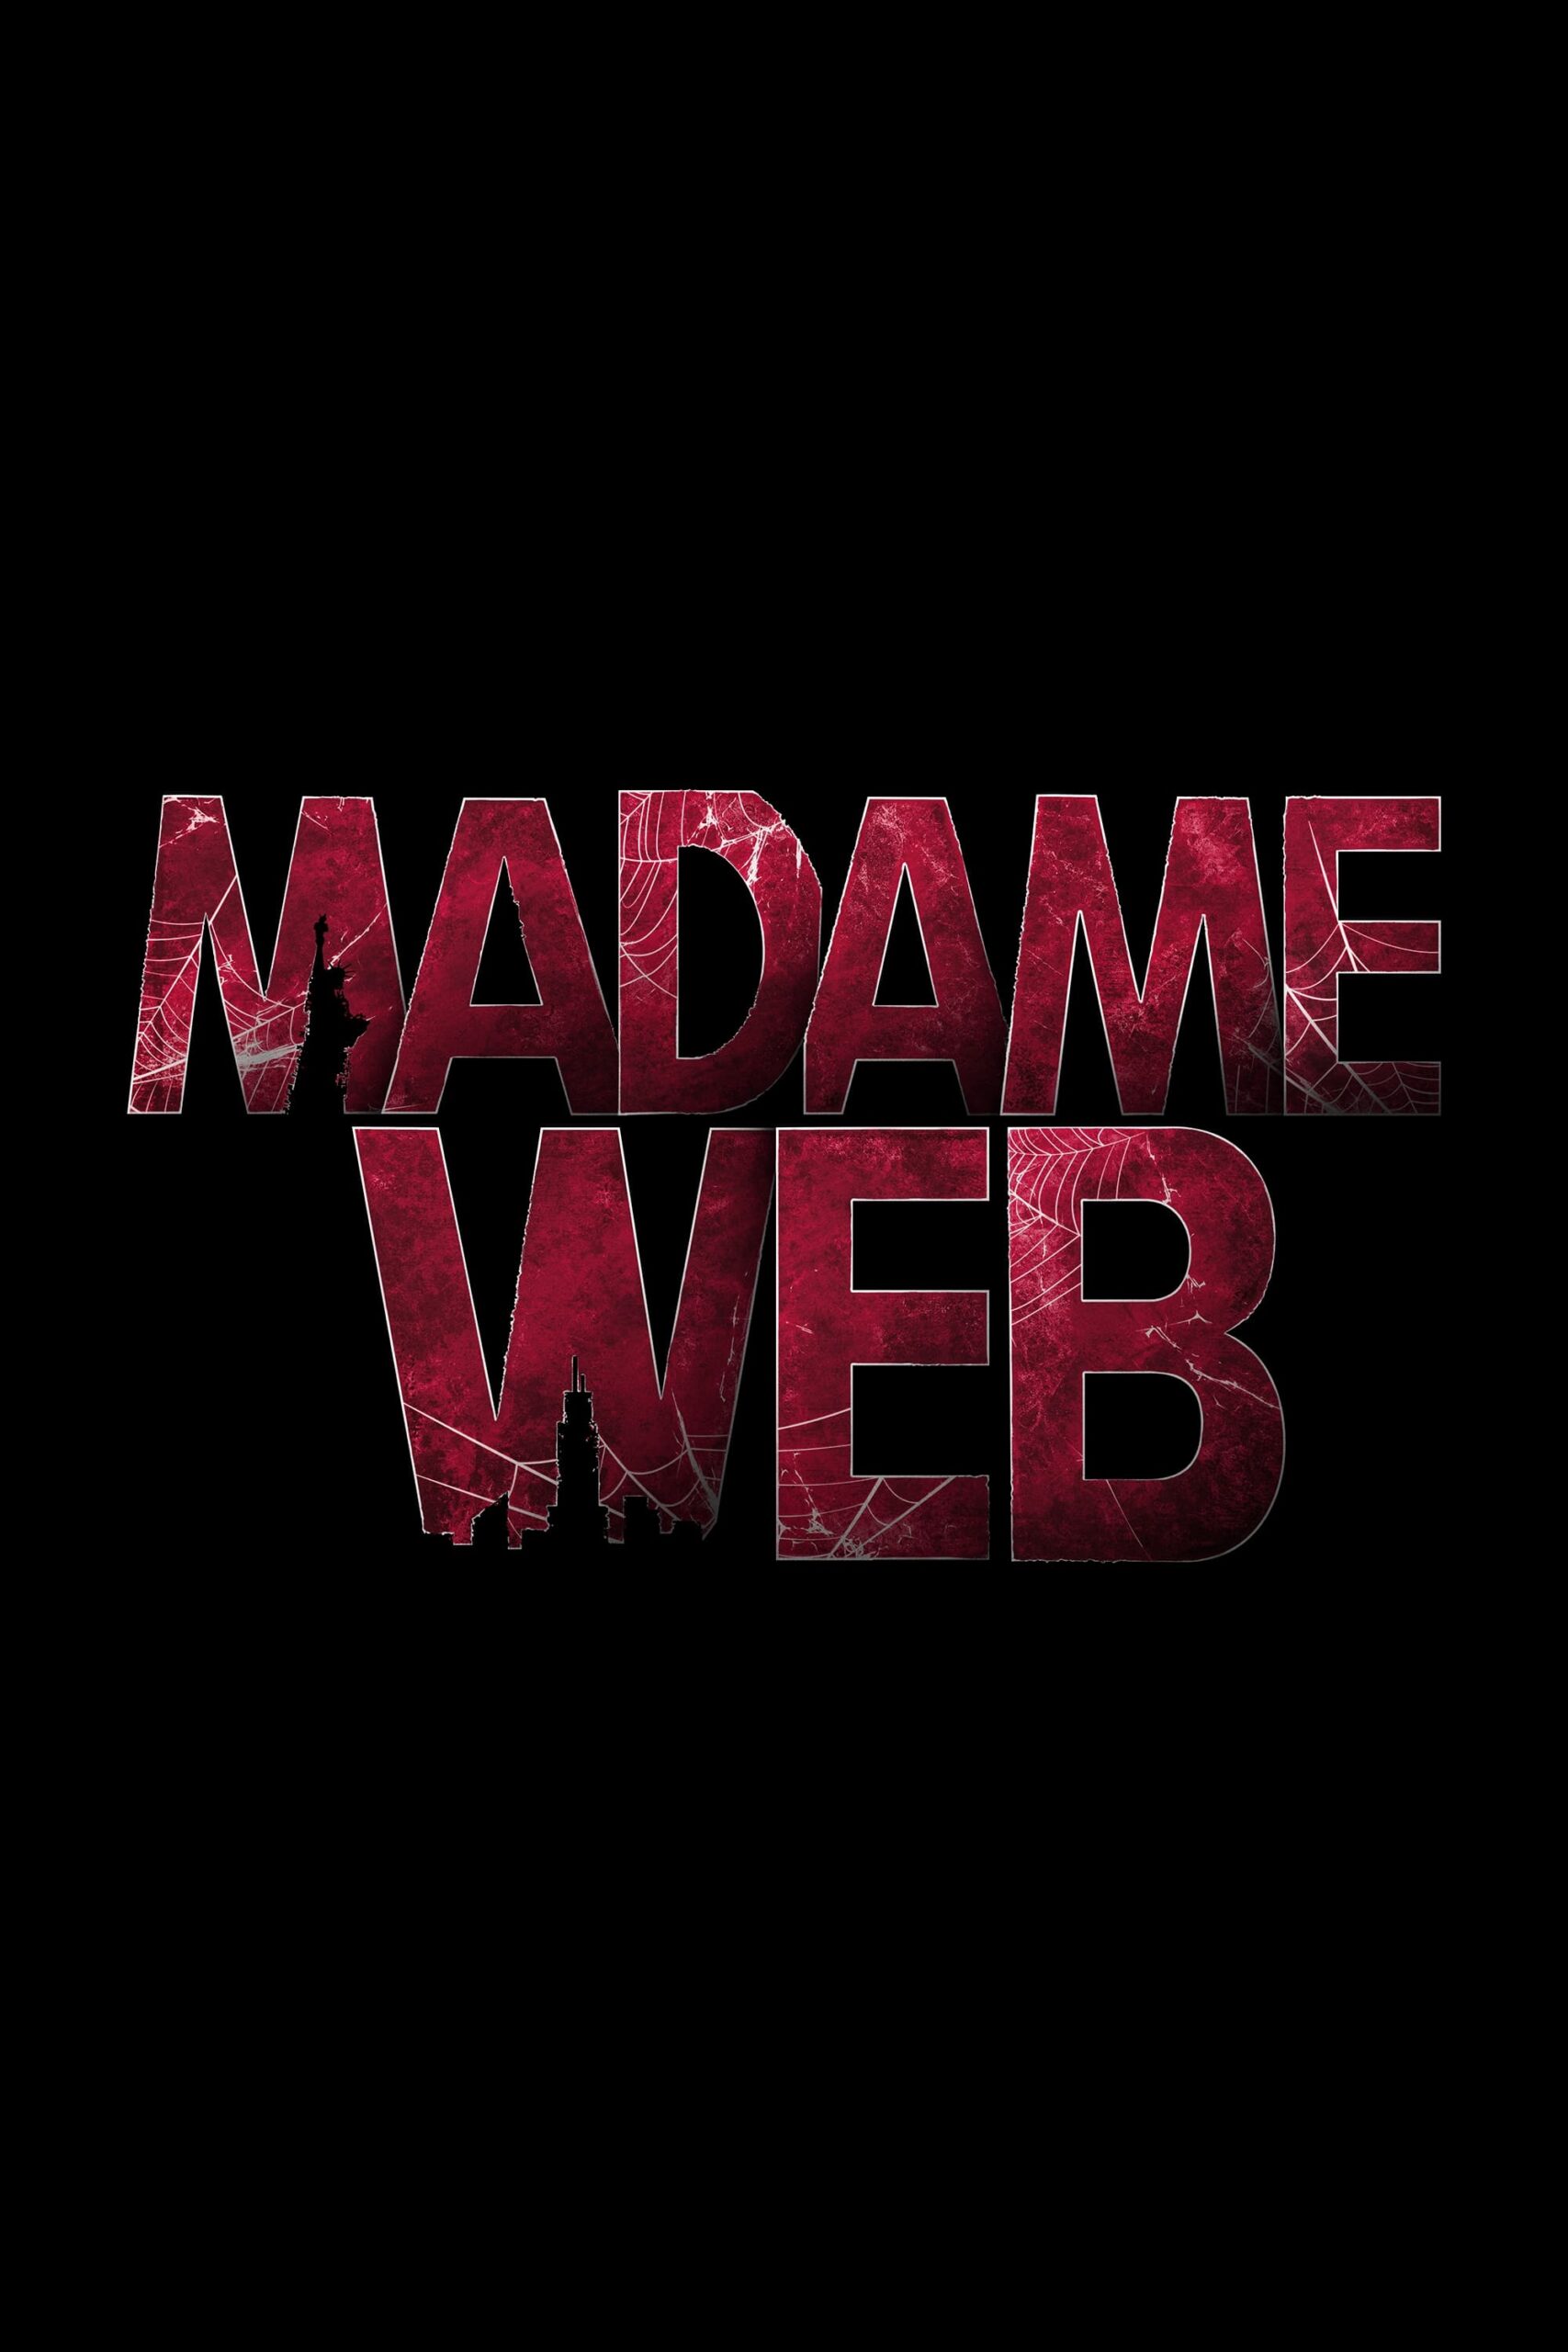 Sony’s Live-Action Spider-Verse Expands in Madame Web Trailer